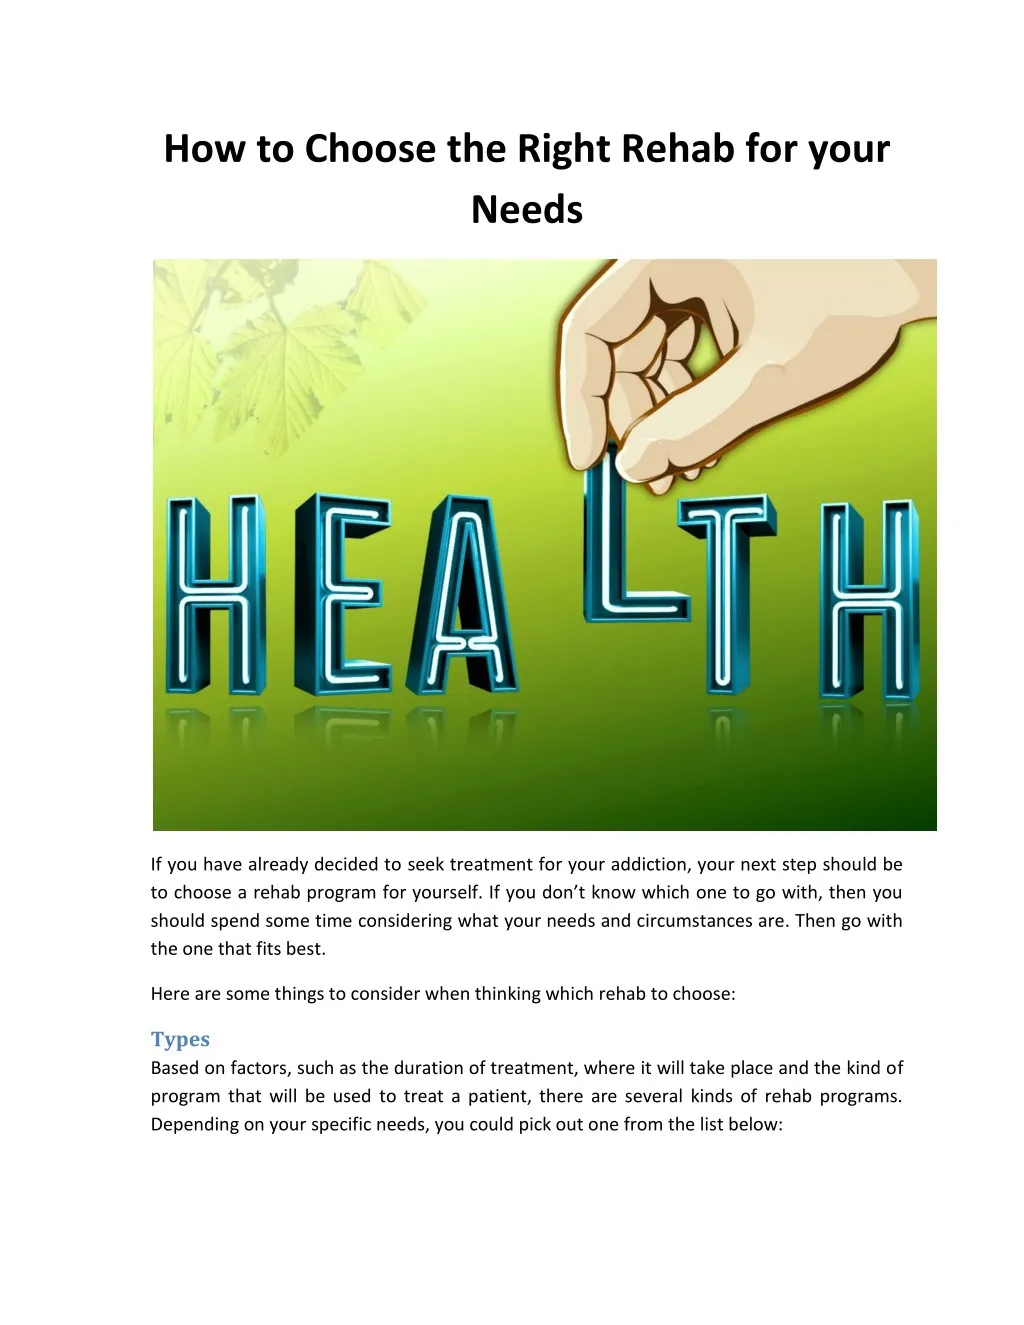 how to choose the right rehab for your needs